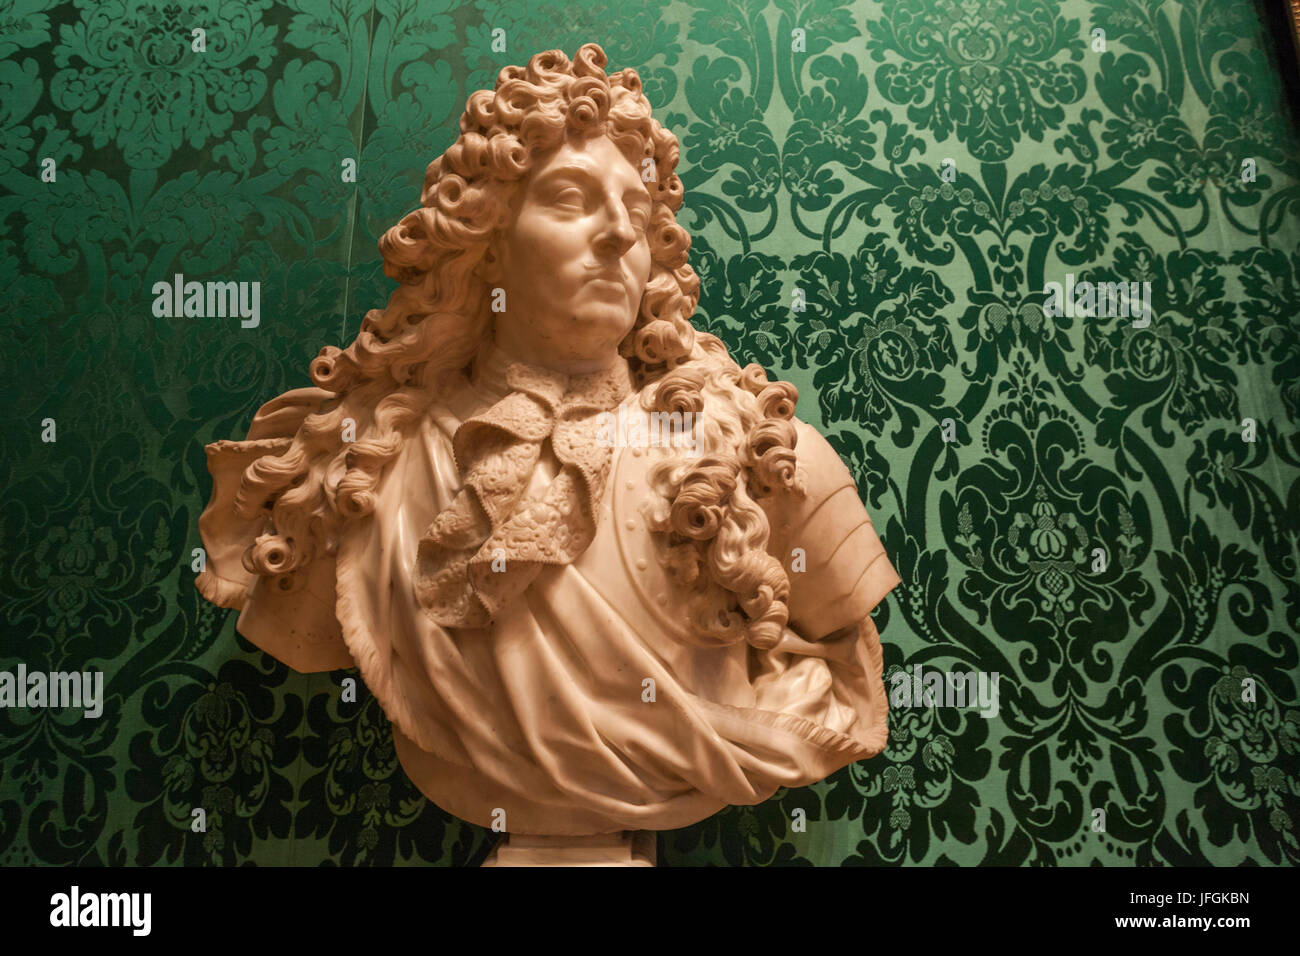 England, London, The Wallace Collection Museum, Marble Bust of Louis XIV, King of France Stock Photo